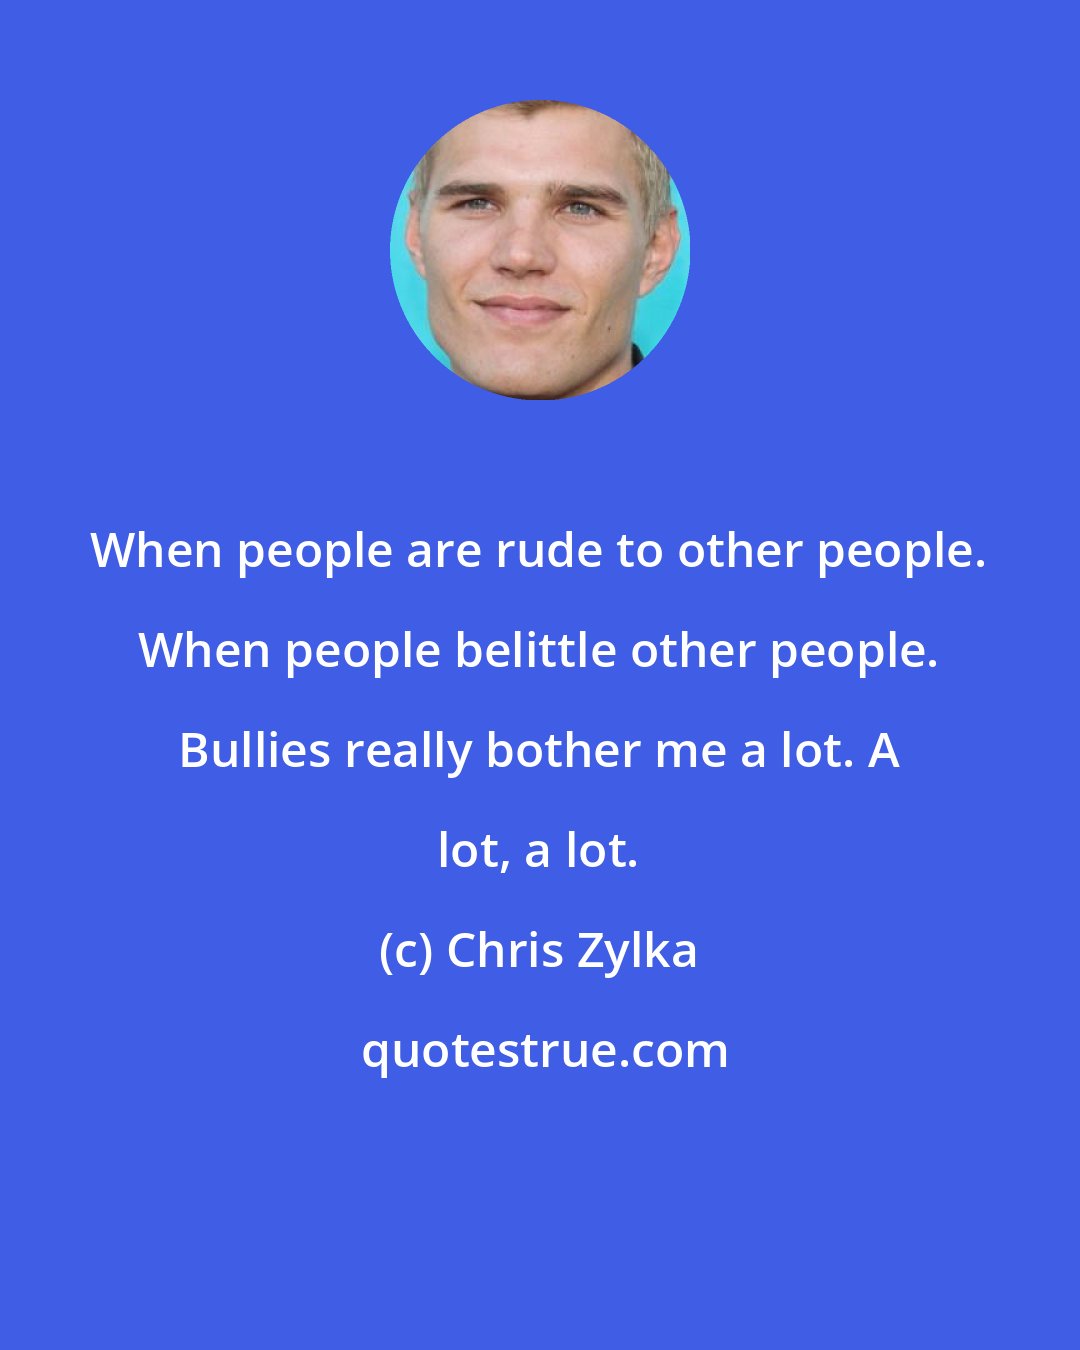 Chris Zylka: When people are rude to other people. When people belittle other people. Bullies really bother me a lot. A lot, a lot.